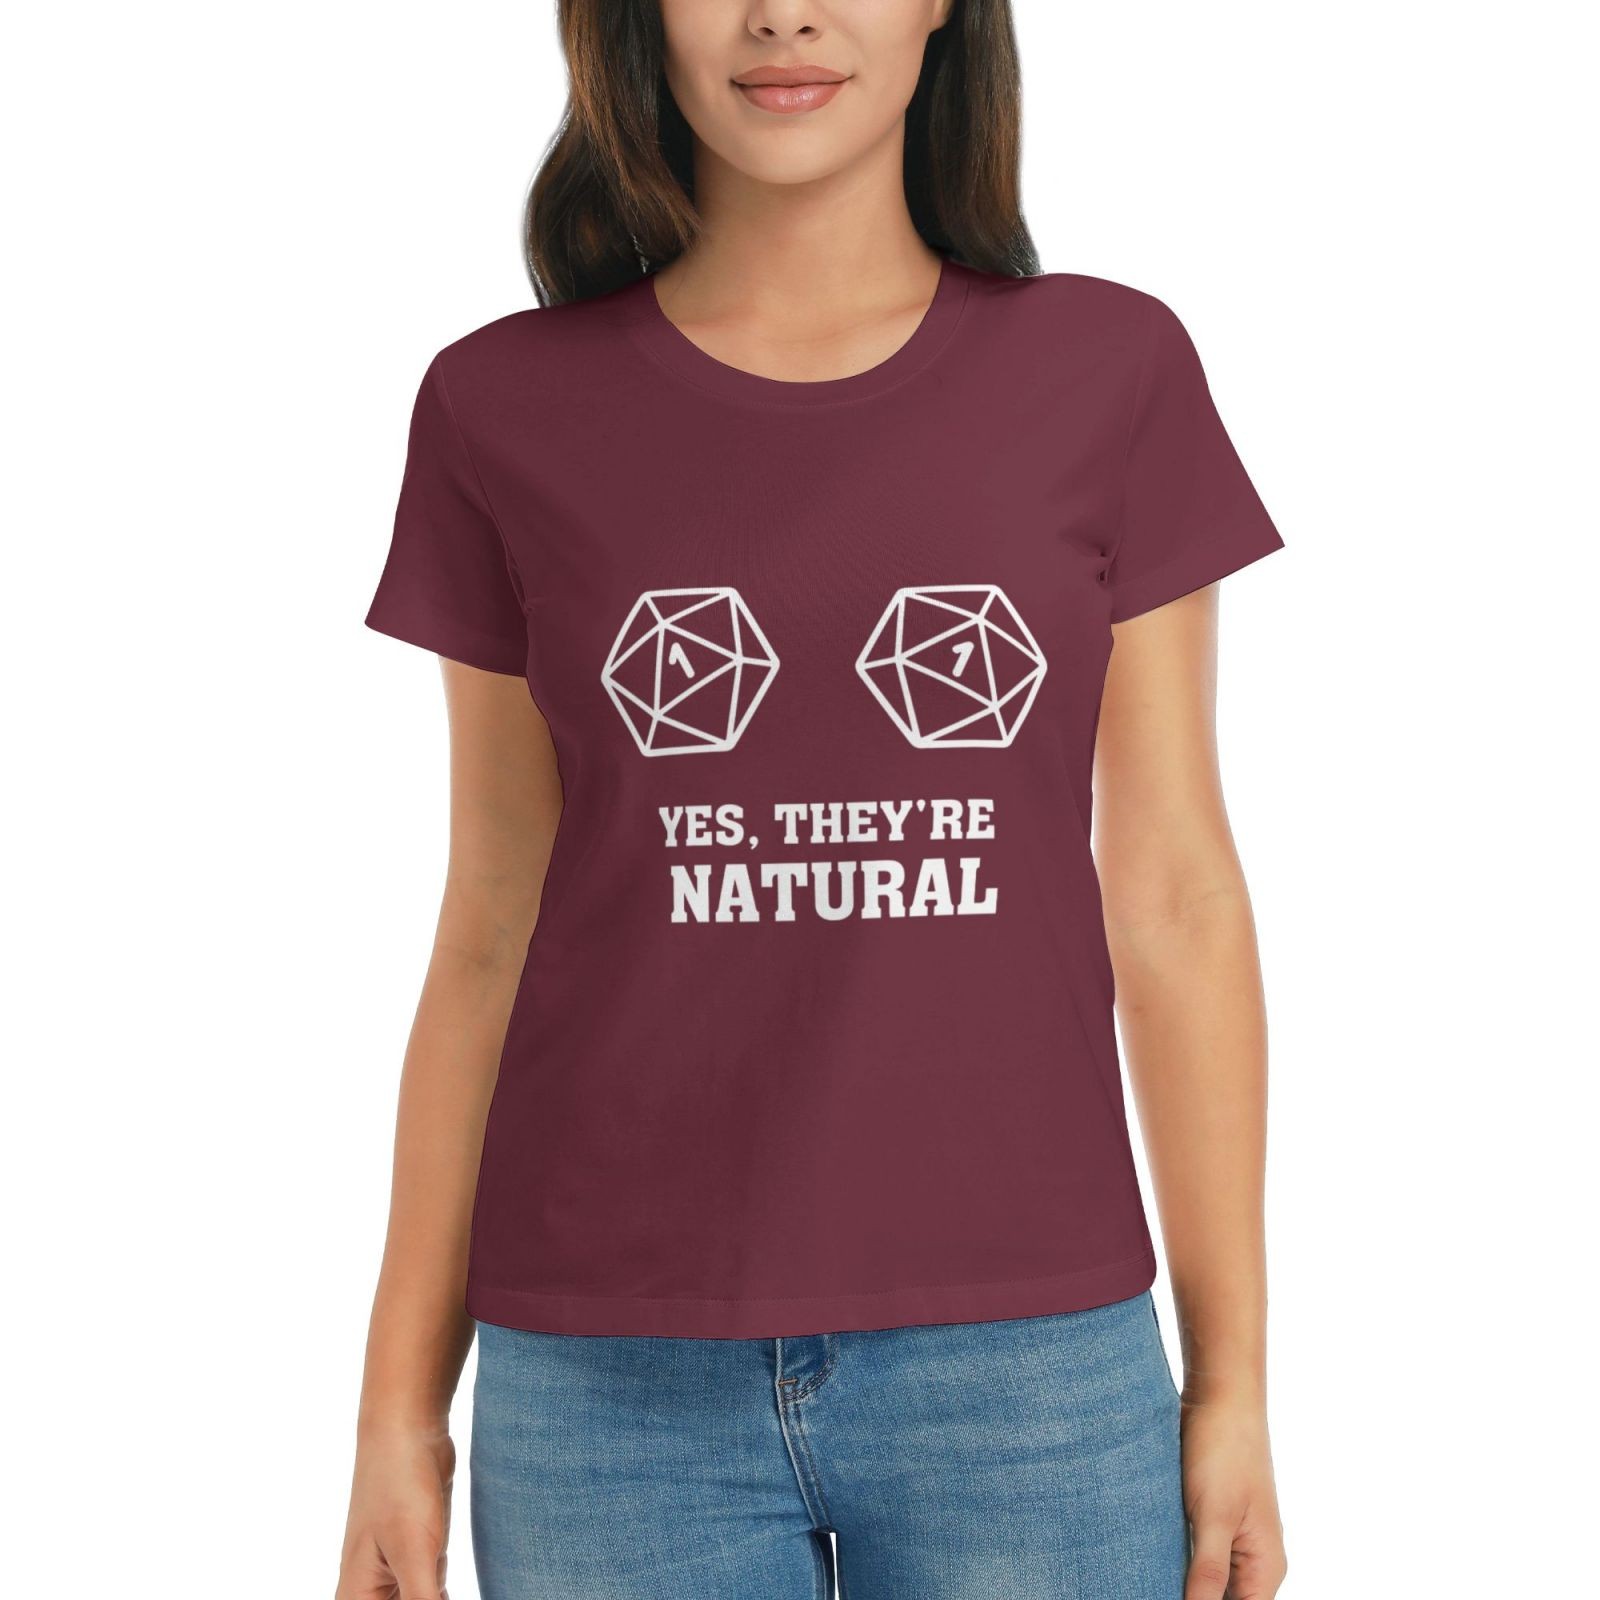 Funny Nat1 T-Shirt - YES, THEY'RE NATURAL